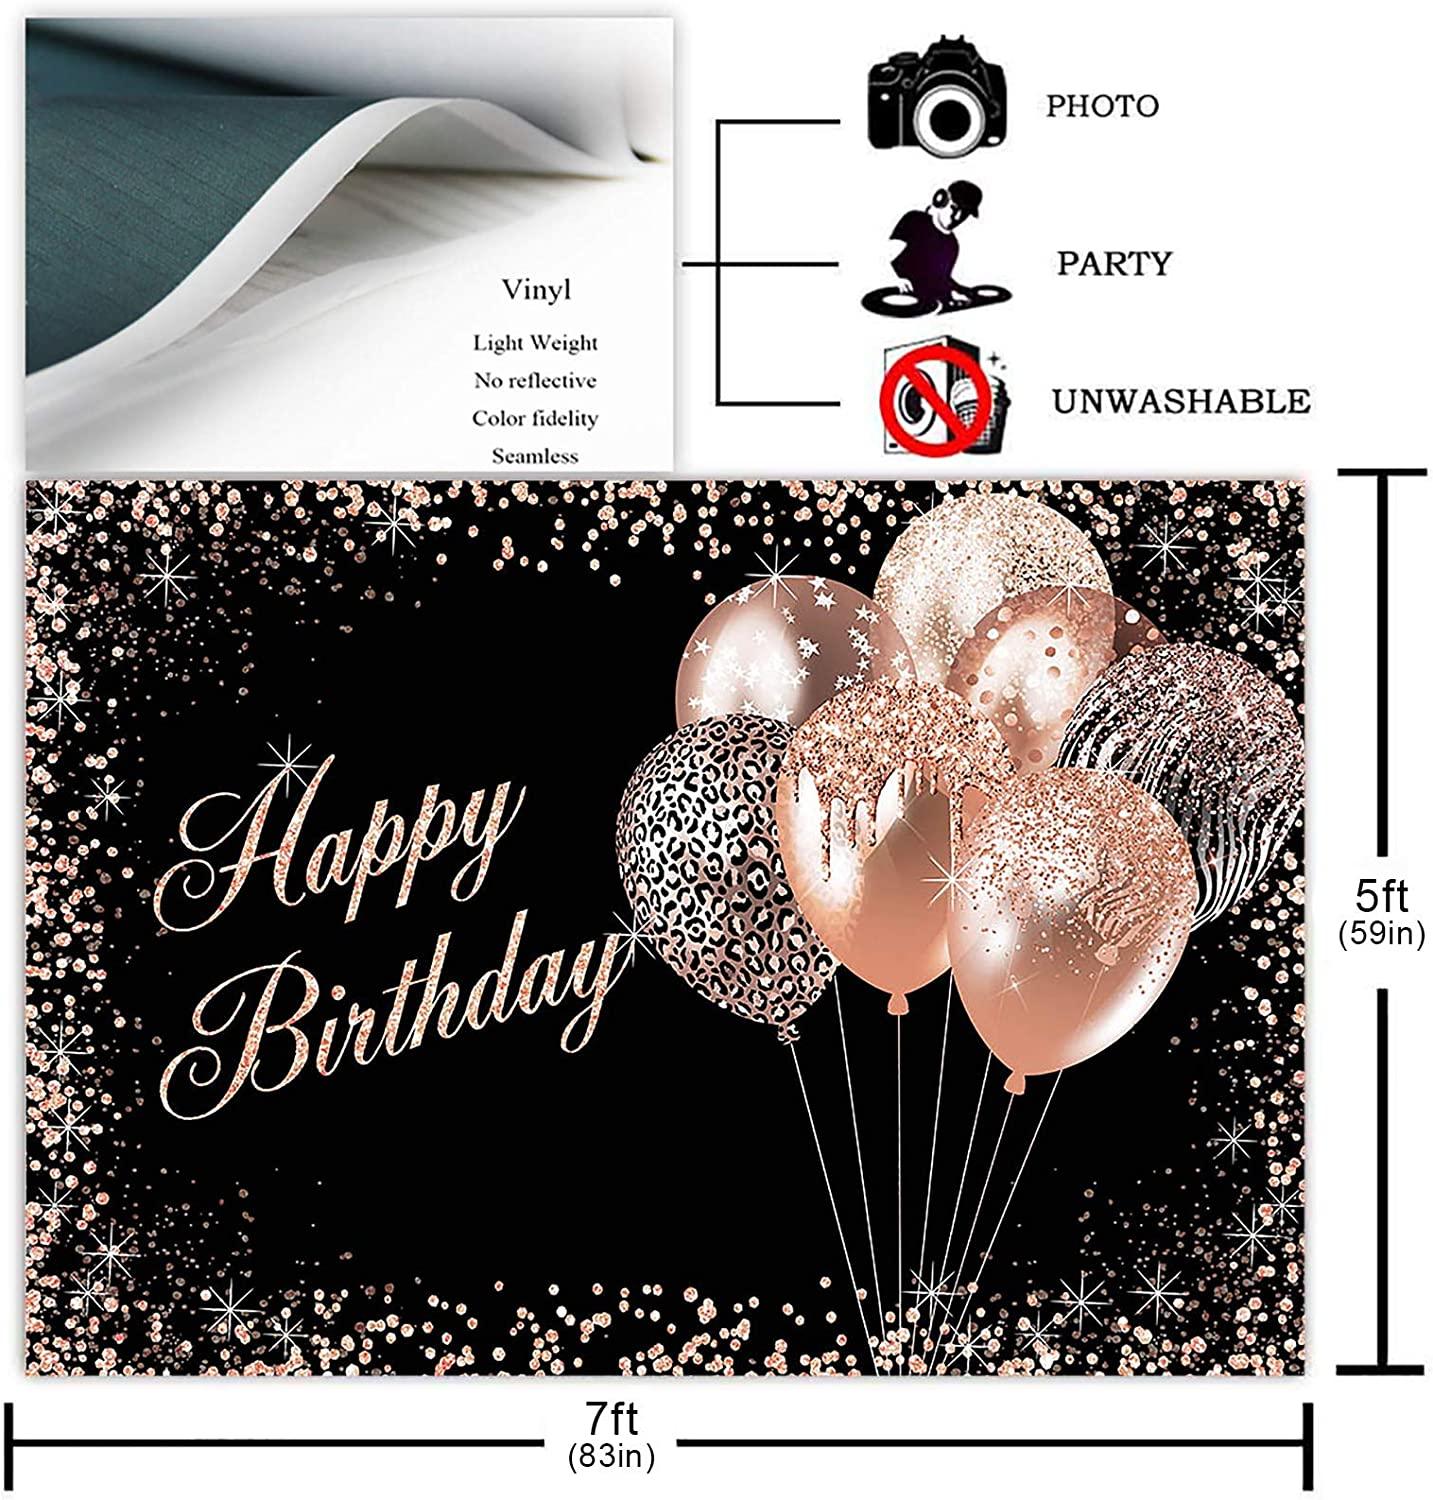 Rose Gold Birthday Backdrop for Girls Women Happy Birthday Party Decoration Photoshoot - If you say i do